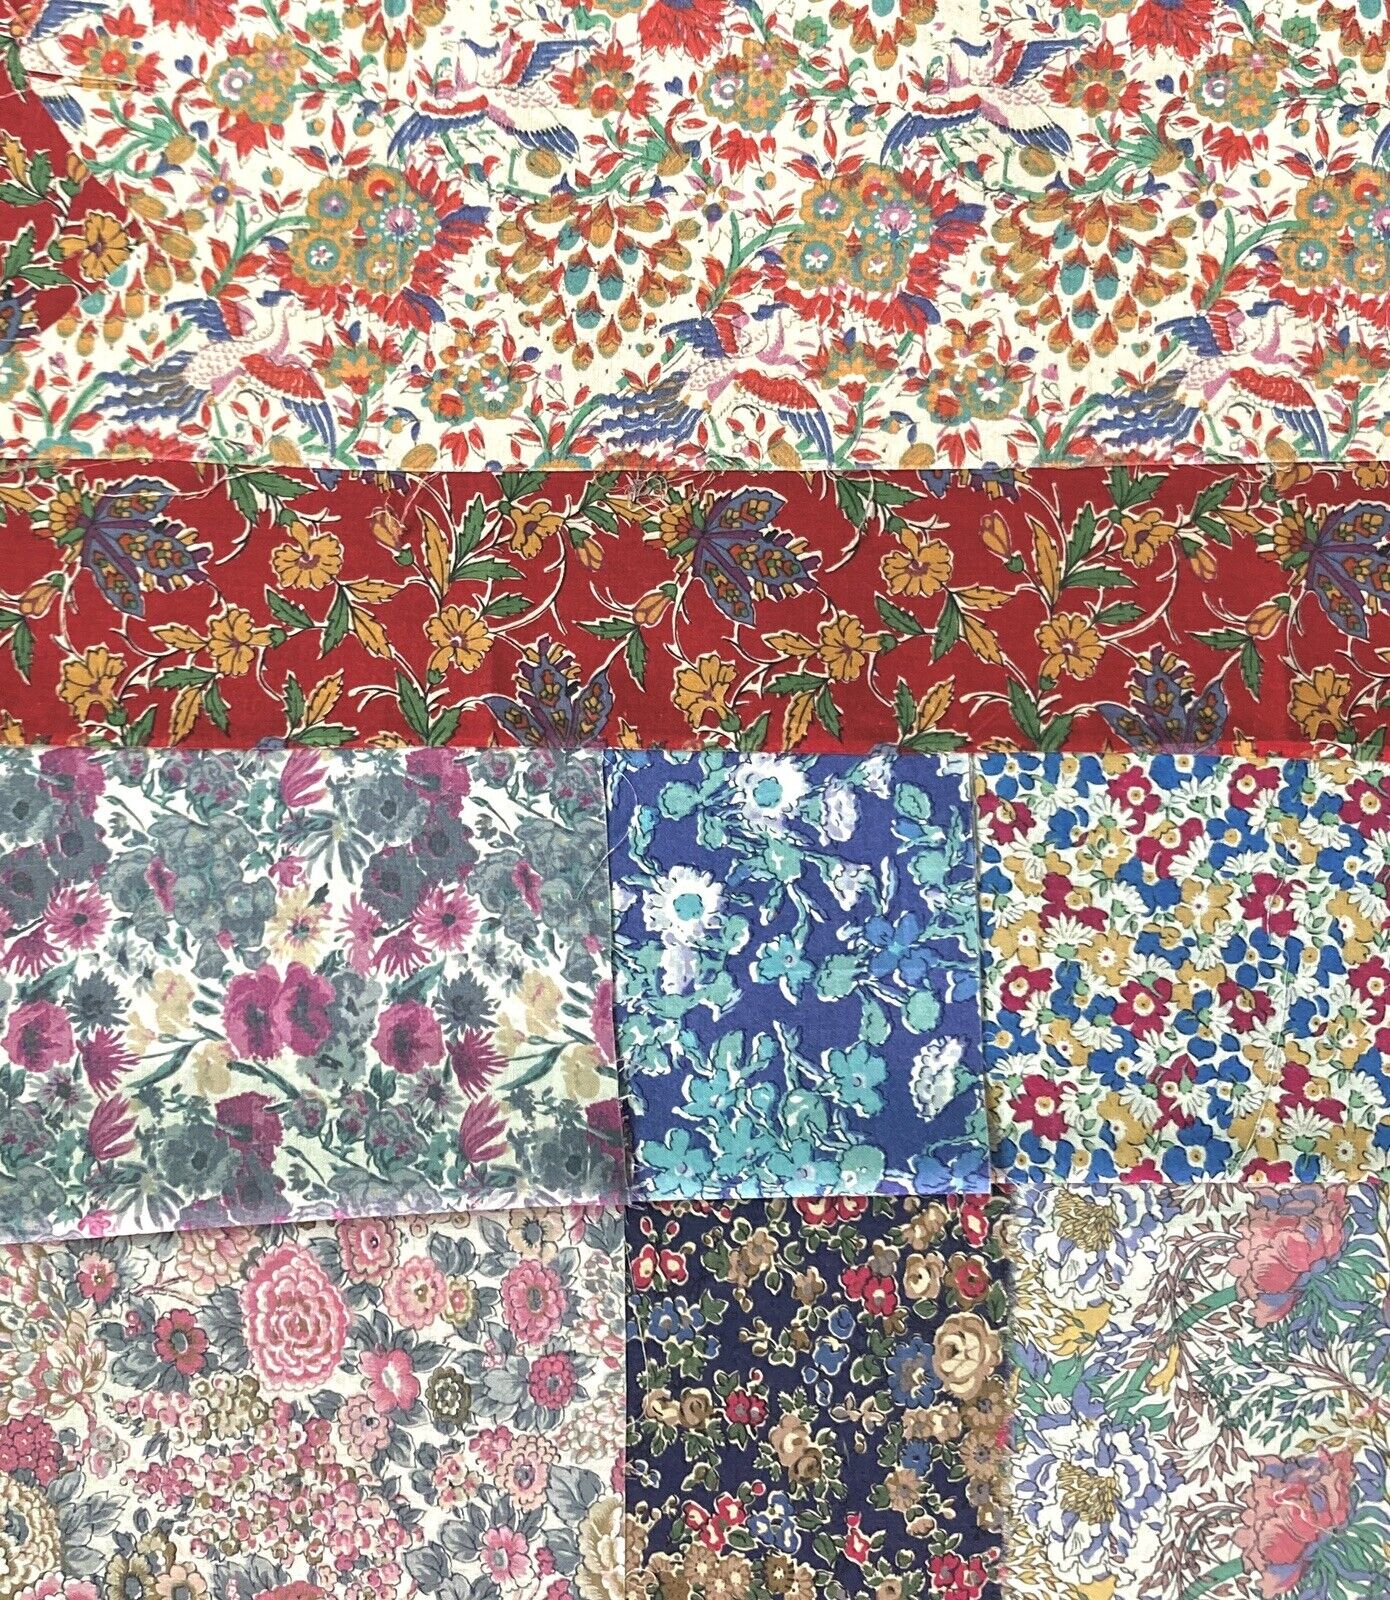 #8 Vintage Liberty of London fabric Remnants. Beautiful Floral Designs 750+ Sq”